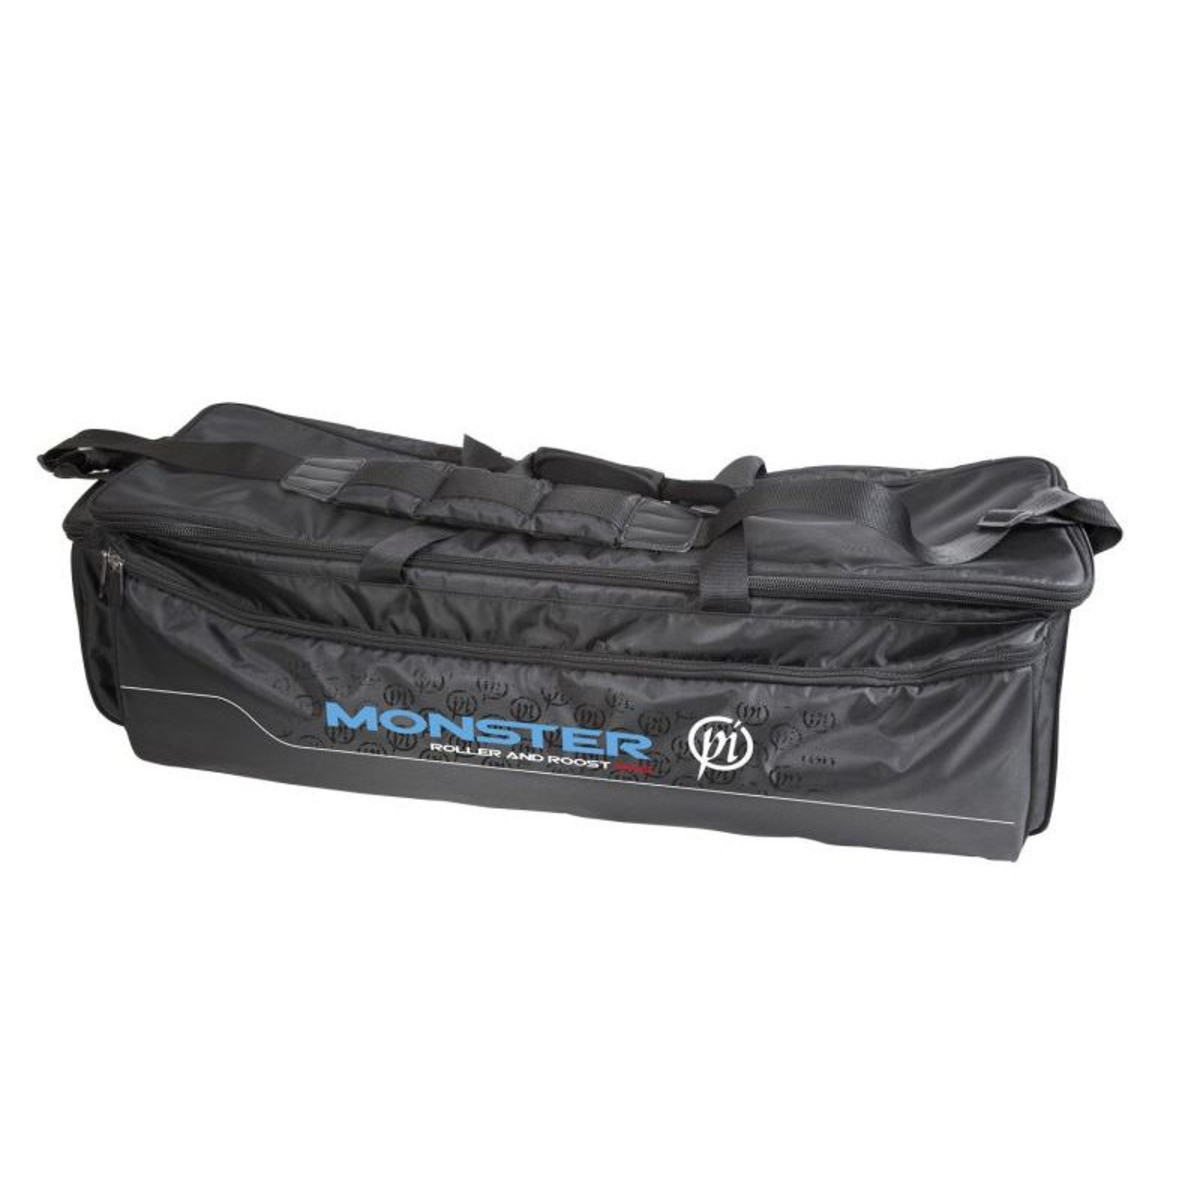 Preston Monster Roller And Roost Bag - 84x13x25 cm